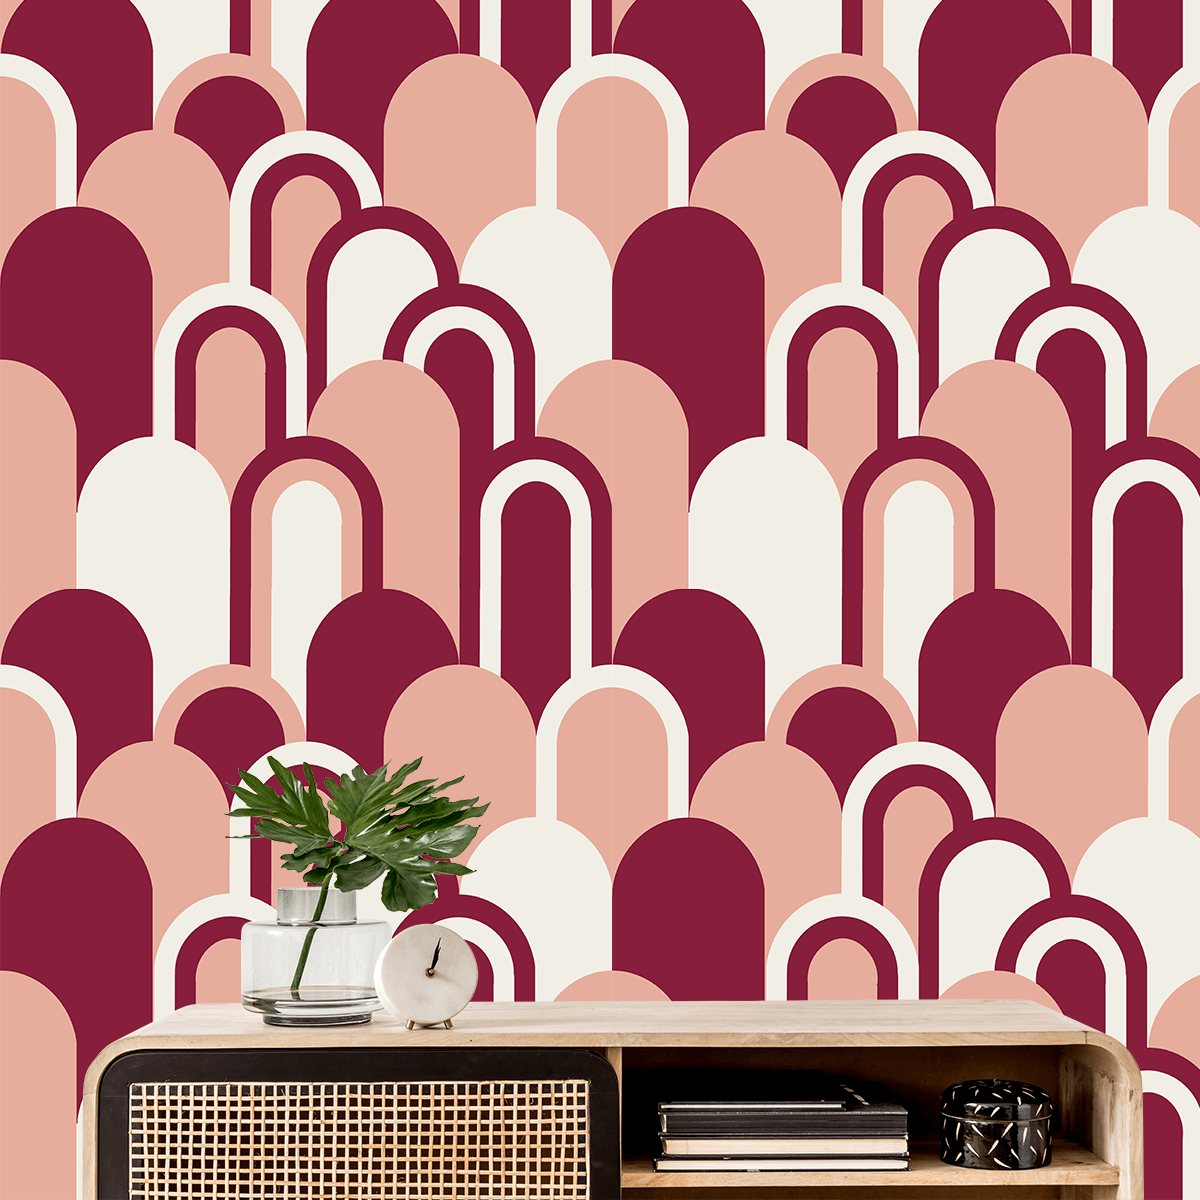 Best bedroom wallpapers - All the help you need for creating a decorating  scheme - see my shop to buy wallpaper, fabric, cushions and homewares